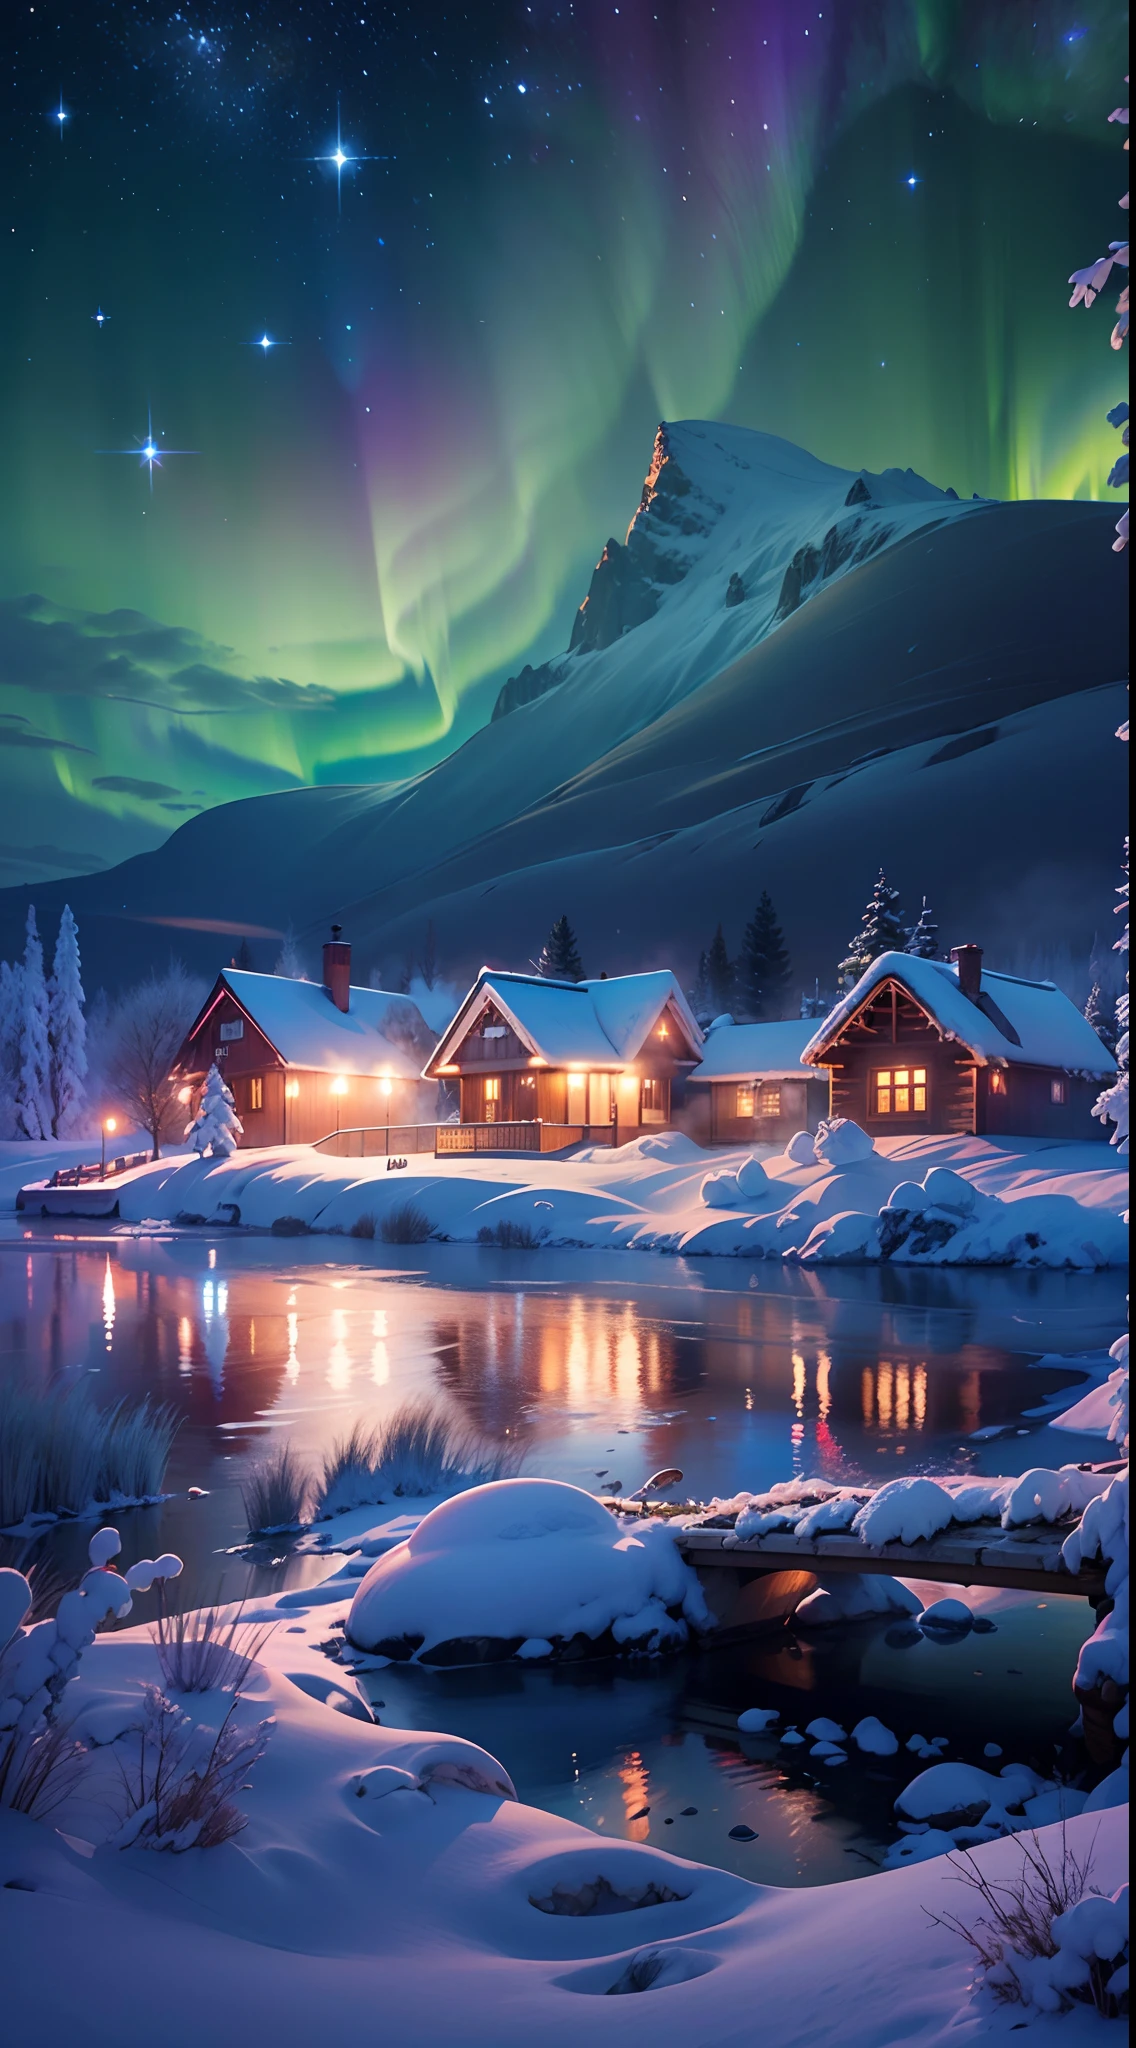 Best quality,A high resolution,(Masterpiece:1.2),Ultra-detailed,Northern Lights, Towering snow-capped mountains, cottage house covered in snow,A snowy hideaway, reindeer,yukito,sled,Winter wonderland,Vibrant colors, ​​clouds,Mist,themoon,galaxias, Breathtaking landscapes, Icy cliffs, Frozen lake, peacful, Majestic beauty, Starry night, ethereal glowing, A miracle of nature, Peaceful solitude, Celestial wonders, vast, Natural phenomena, Silent night, Serene reflection, glittering stars, Mysterious charm